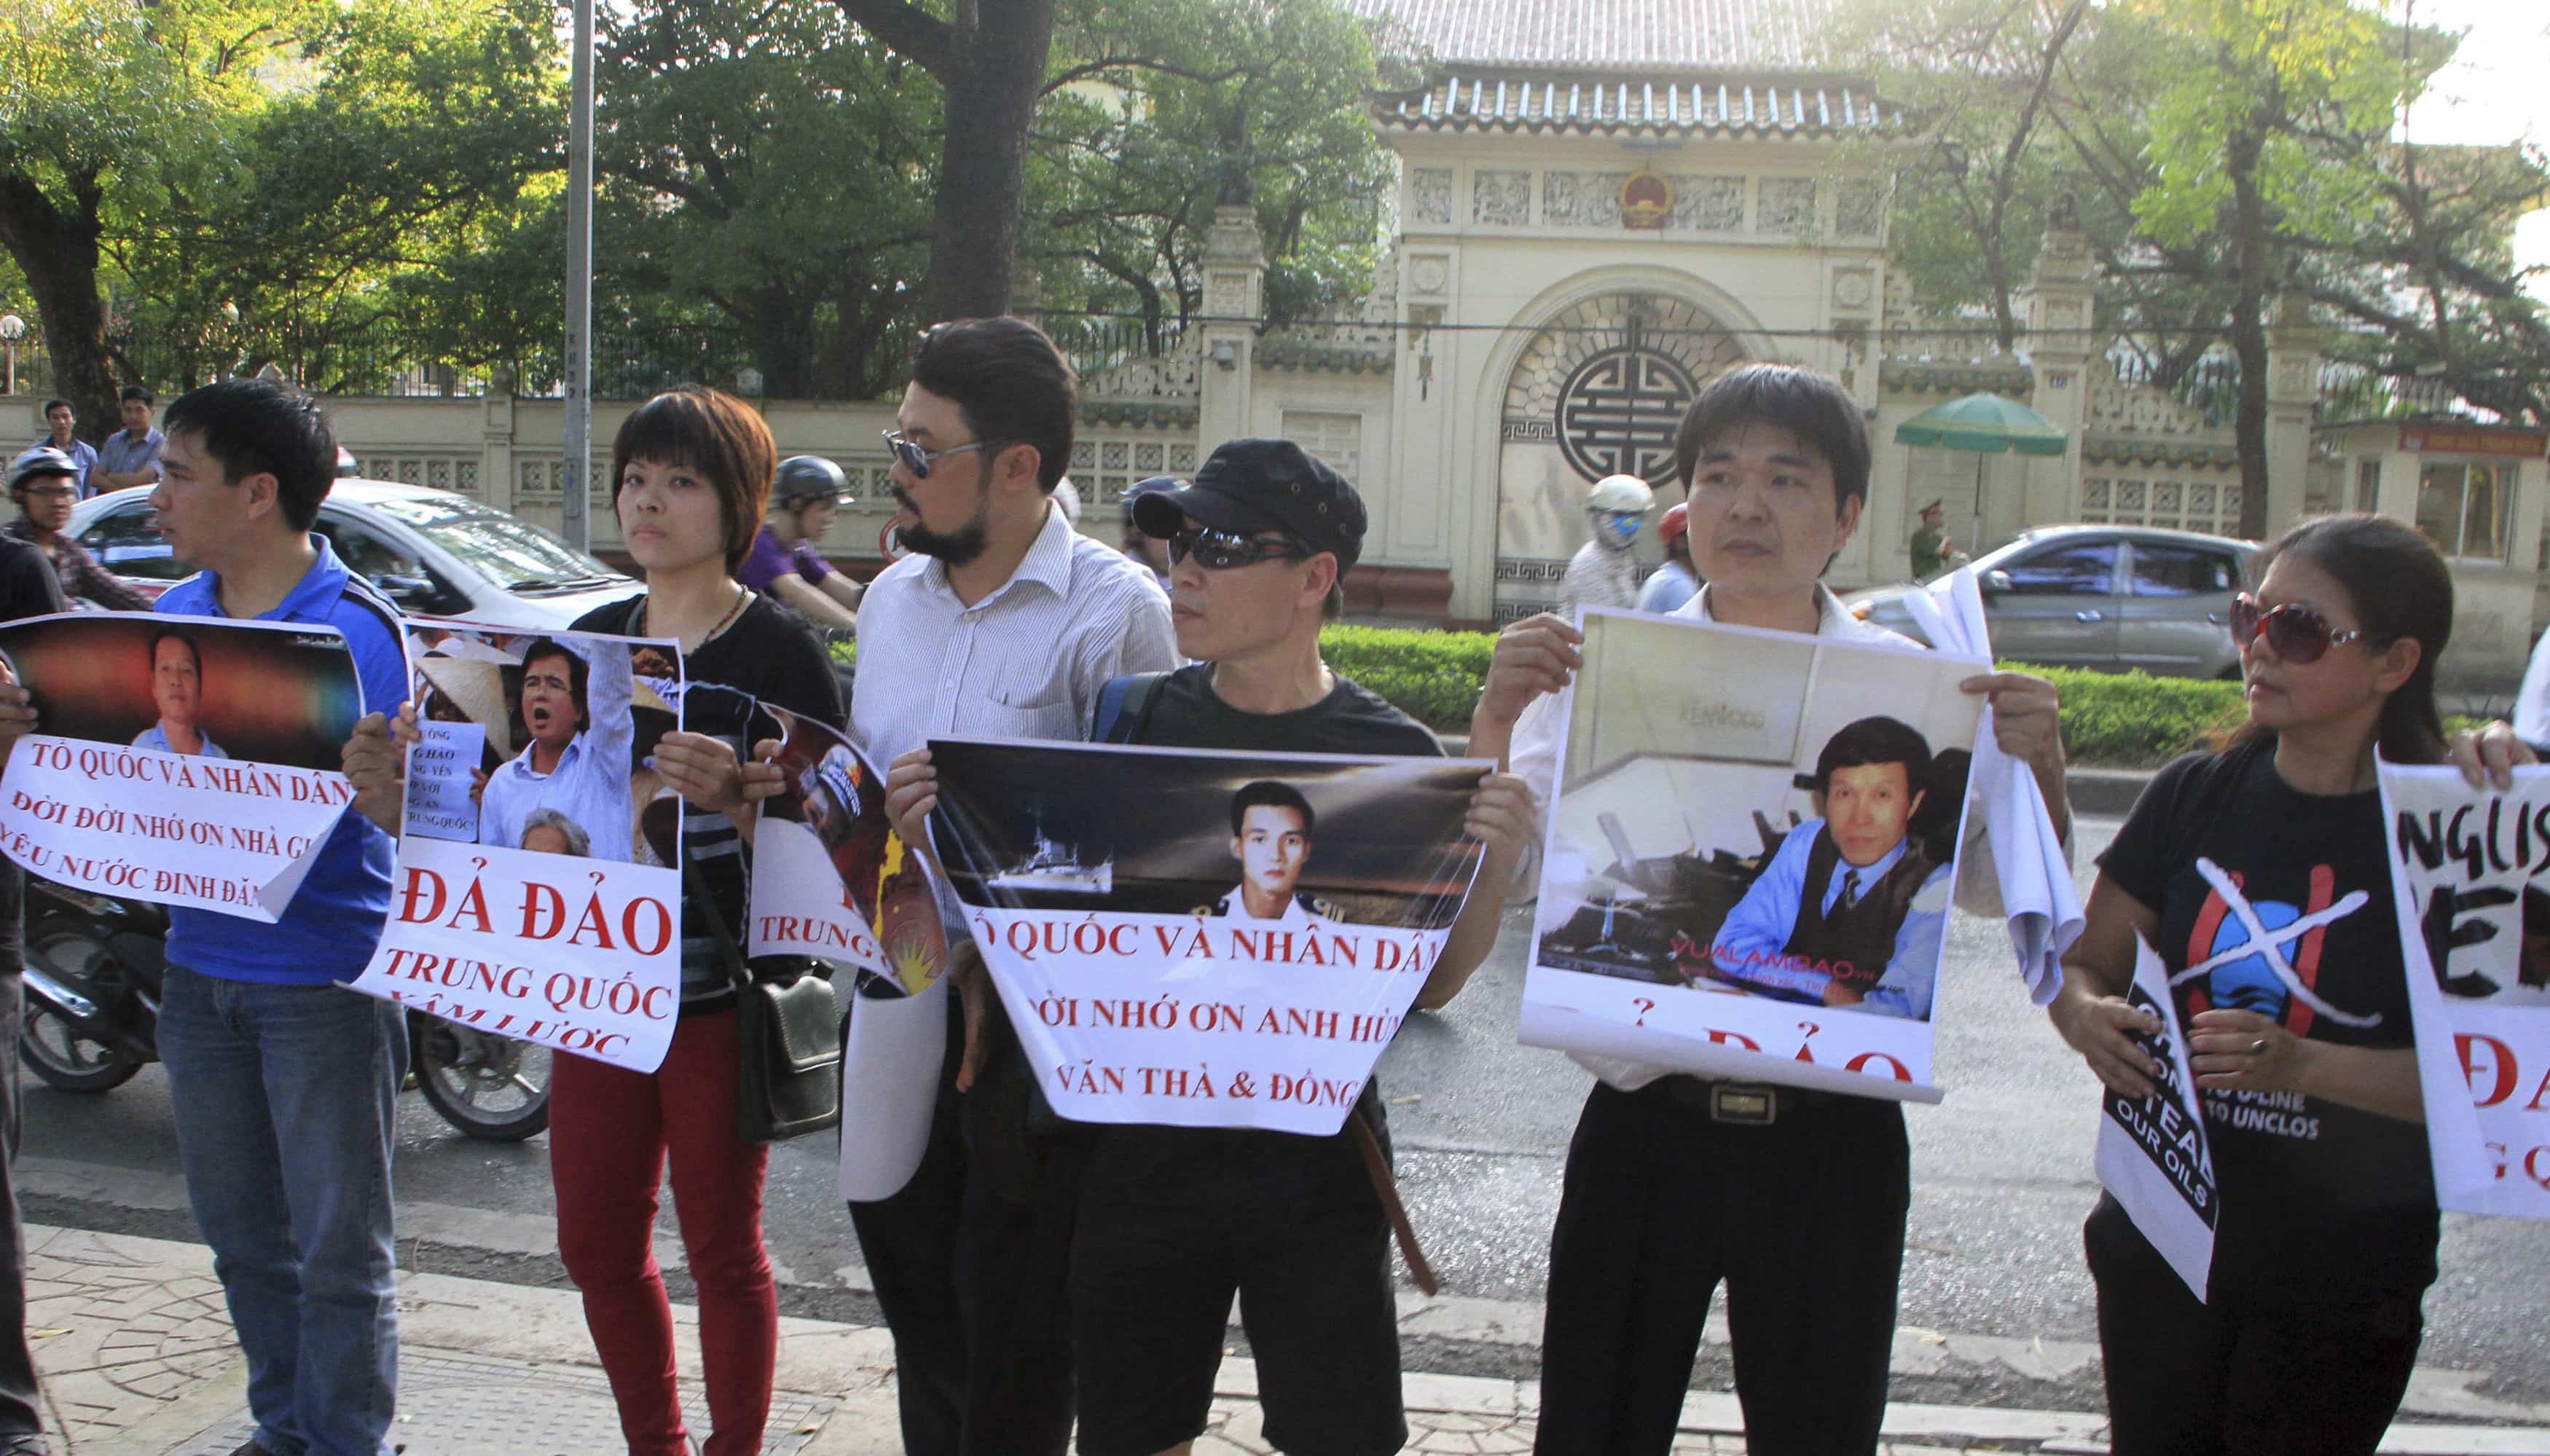 rotesters hold placards with images of activists (L-R) Dinh Dang Dinh, Le Quoc Quan, naval officer Nguy Van Tha and blogger Nguyen Huu Vinh, as they gather in front of the Chinese embassy in Hanoi, 9 May 2014, REUTERS/ Nguyen Huu Vinh